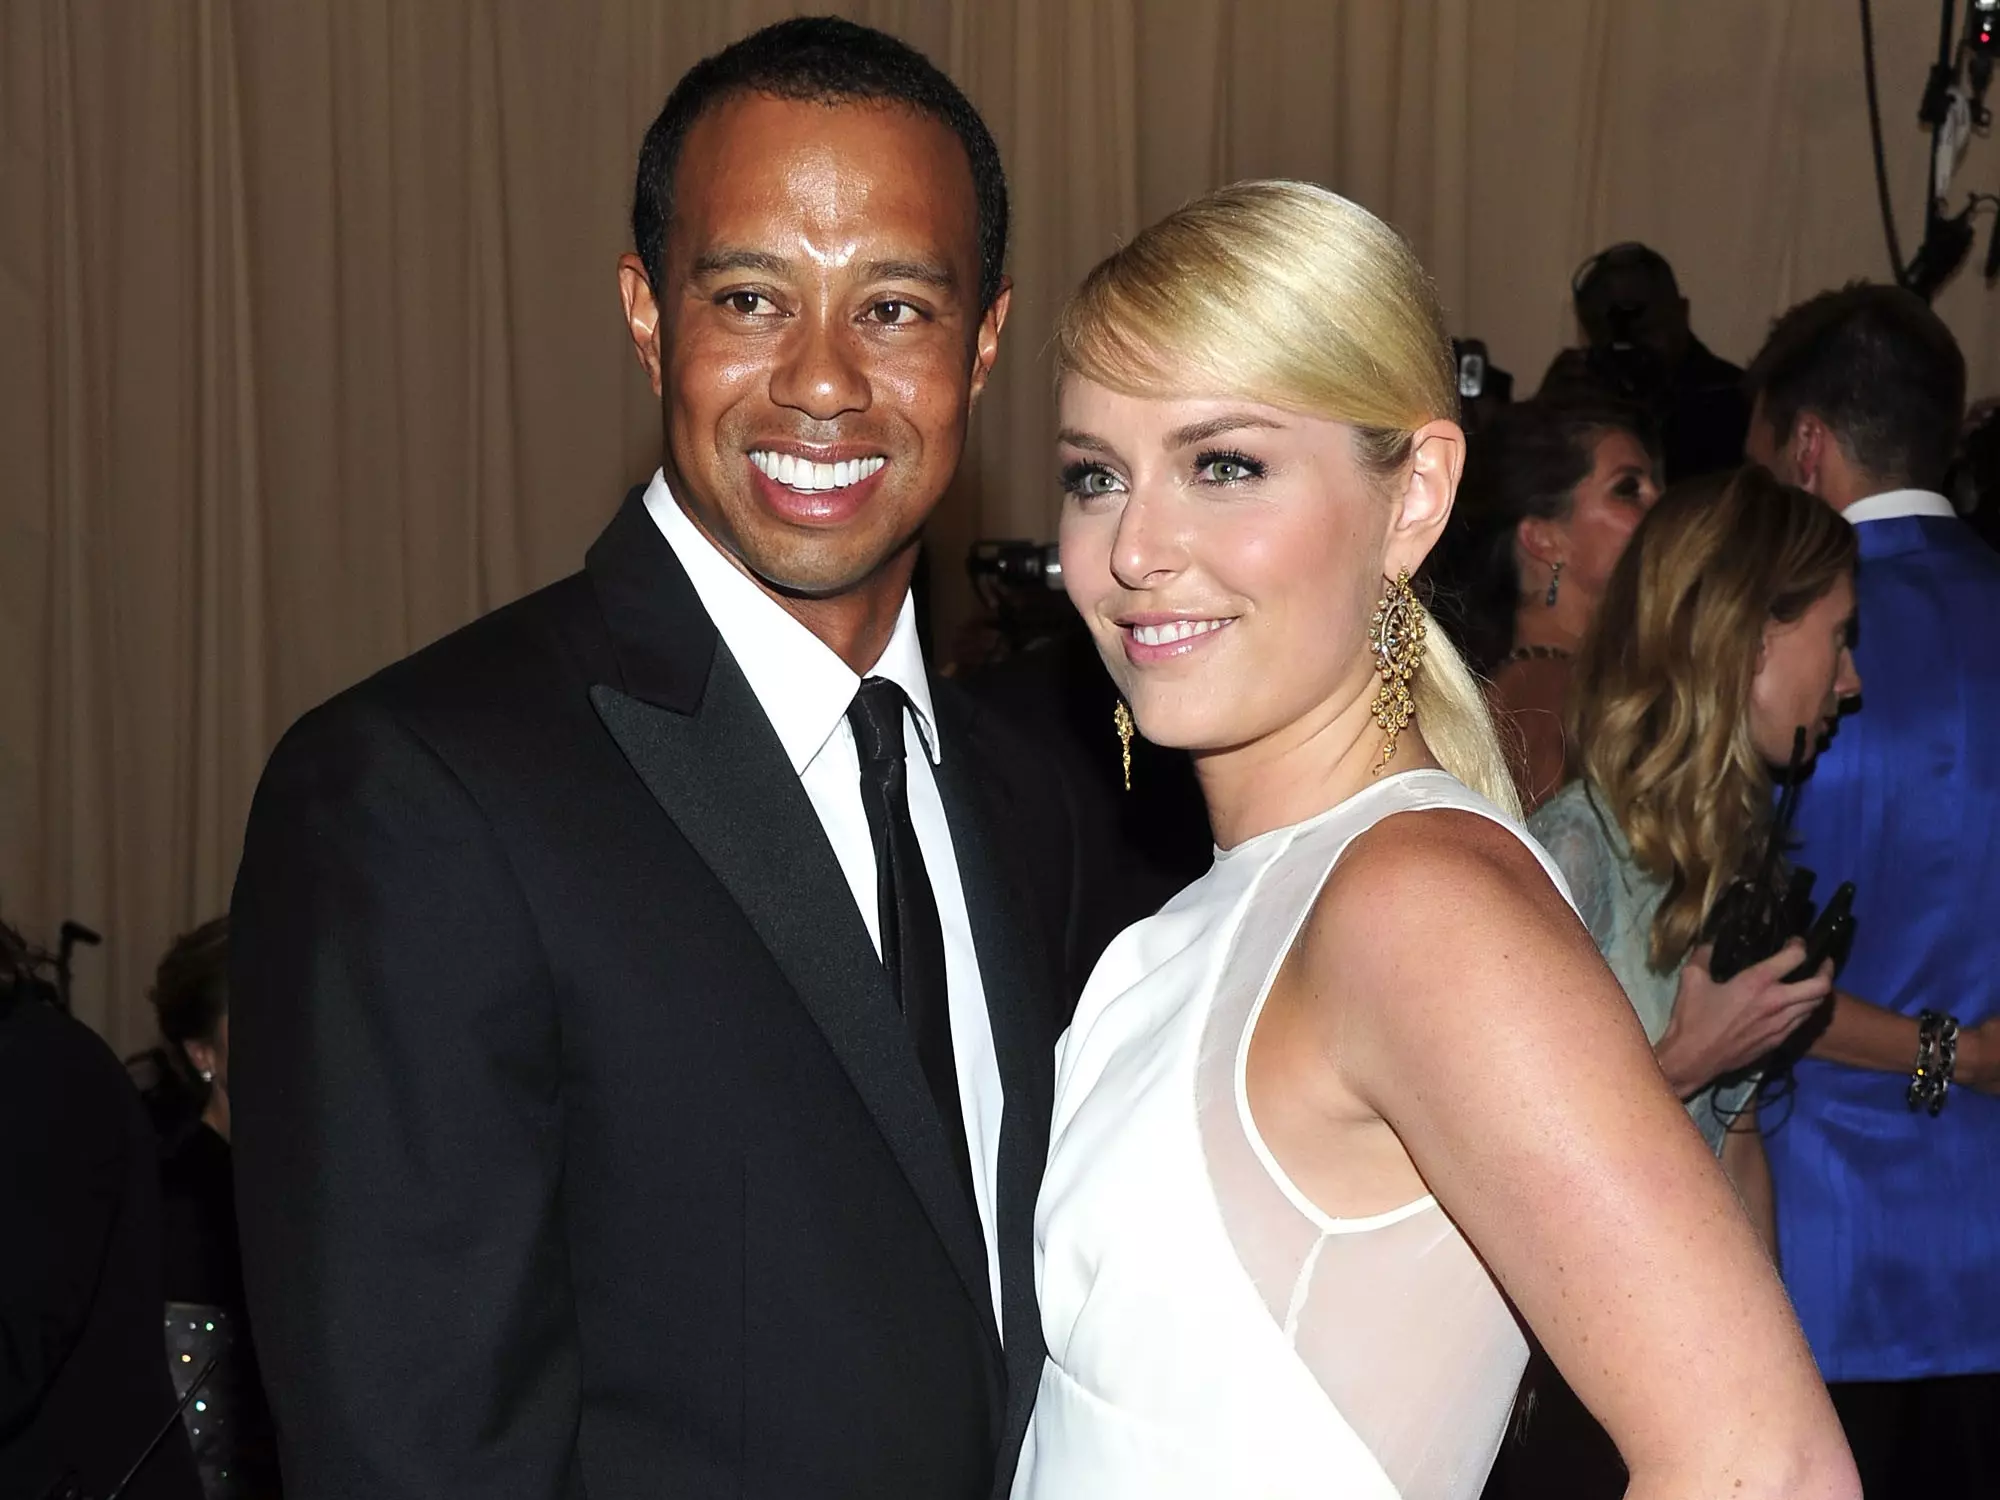 Tiger Woods and Lindsey Vonn Sizzle at Red Carpet